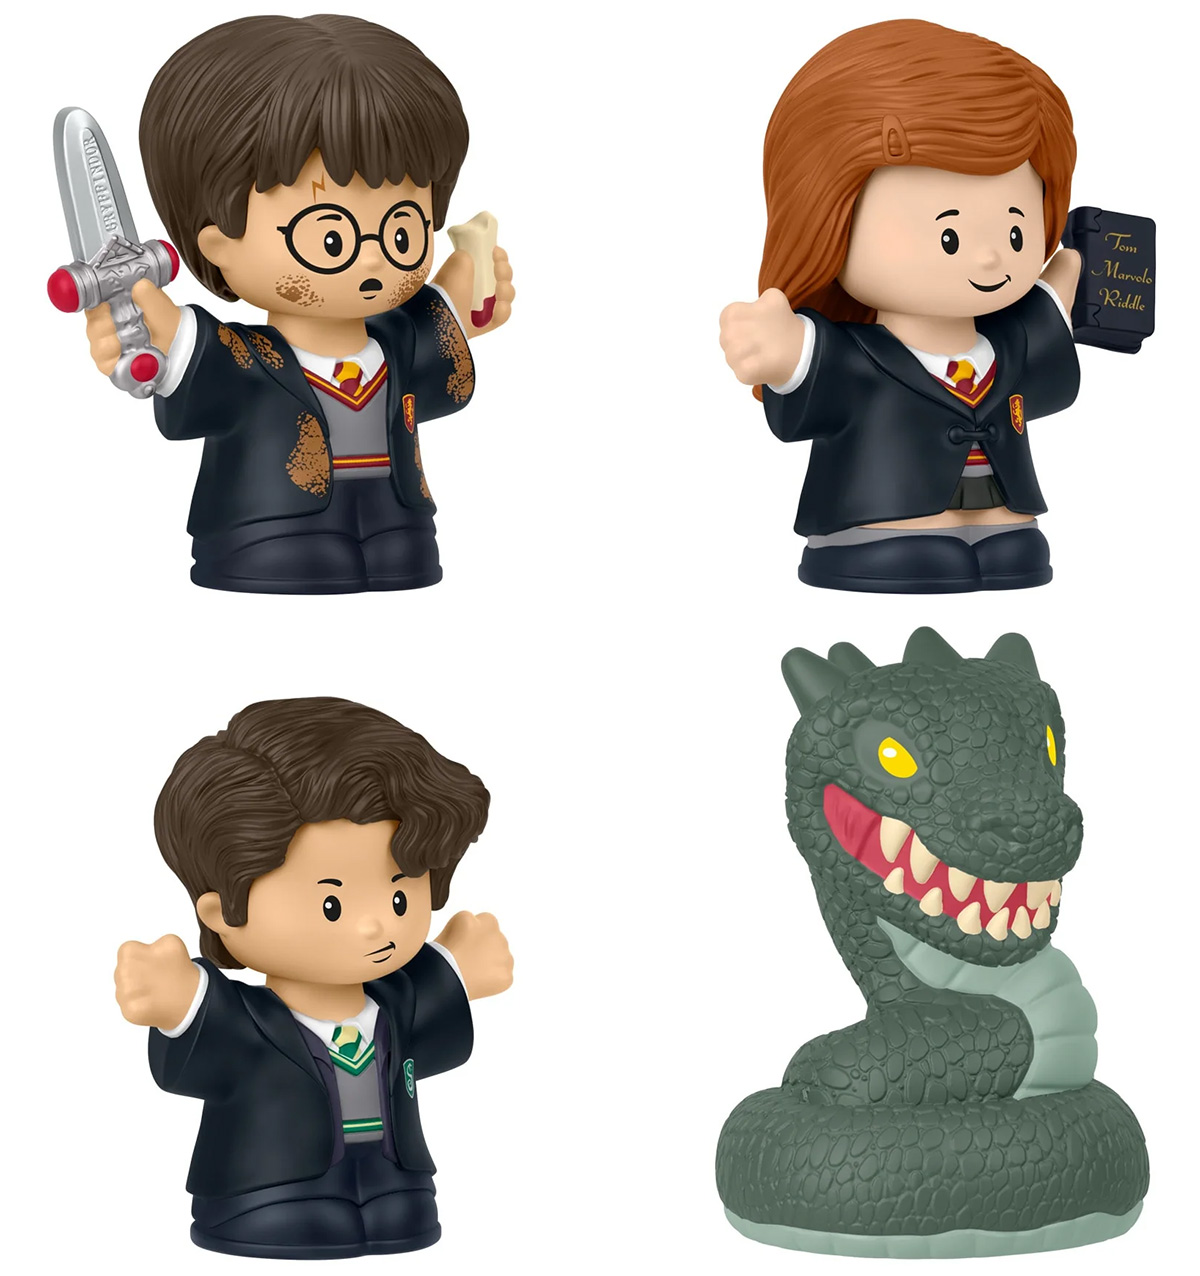 Little People Collector Harry Potter: Sorcerer's Stone and the Chamber of Secrets dolls